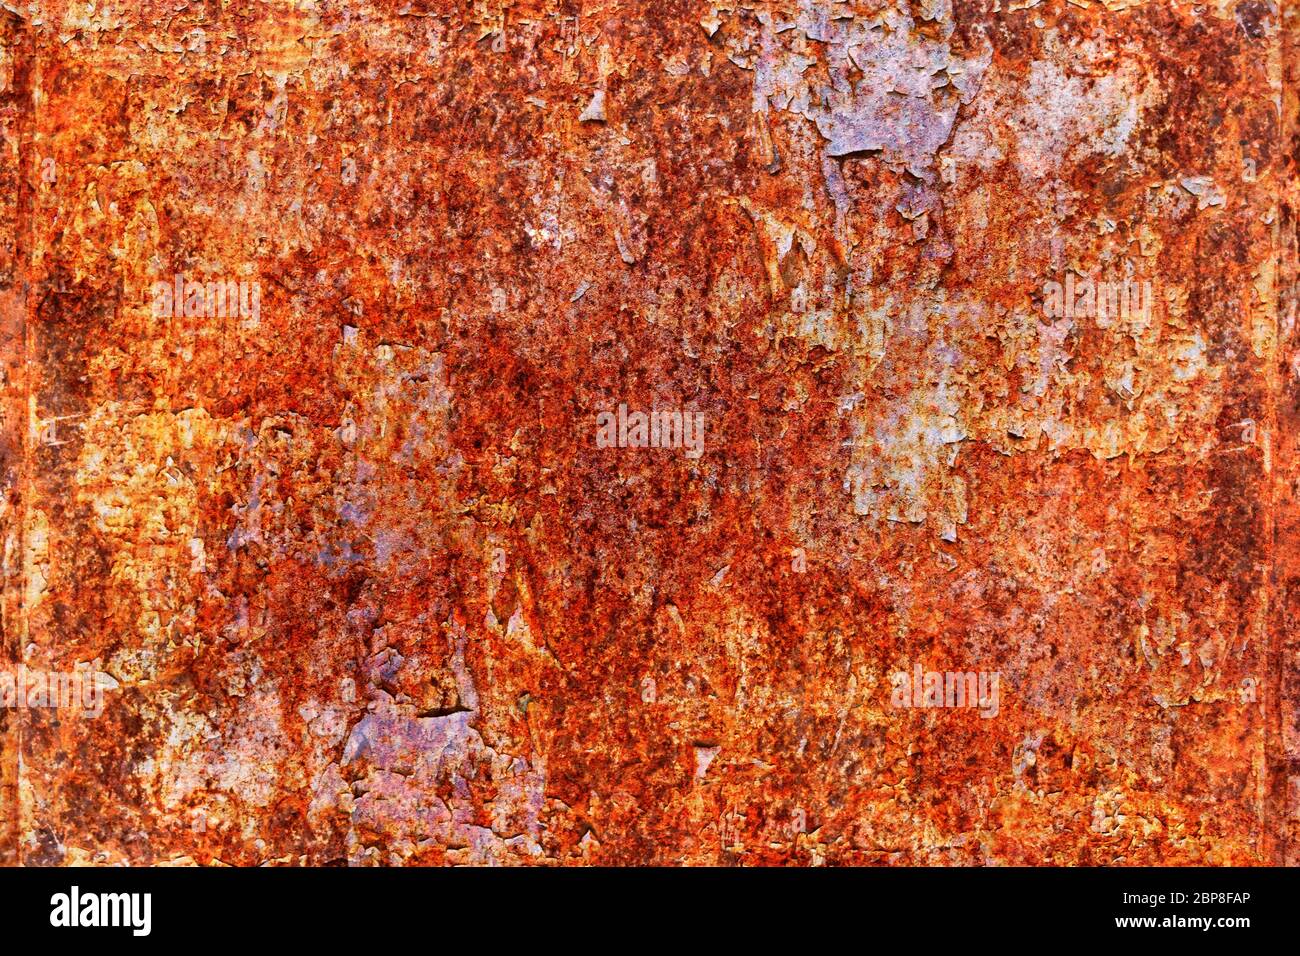 Grunge metal coroded texture. Old rusty metal plate heavily aged corrosion stain creates a grungy frame. Stock Photo